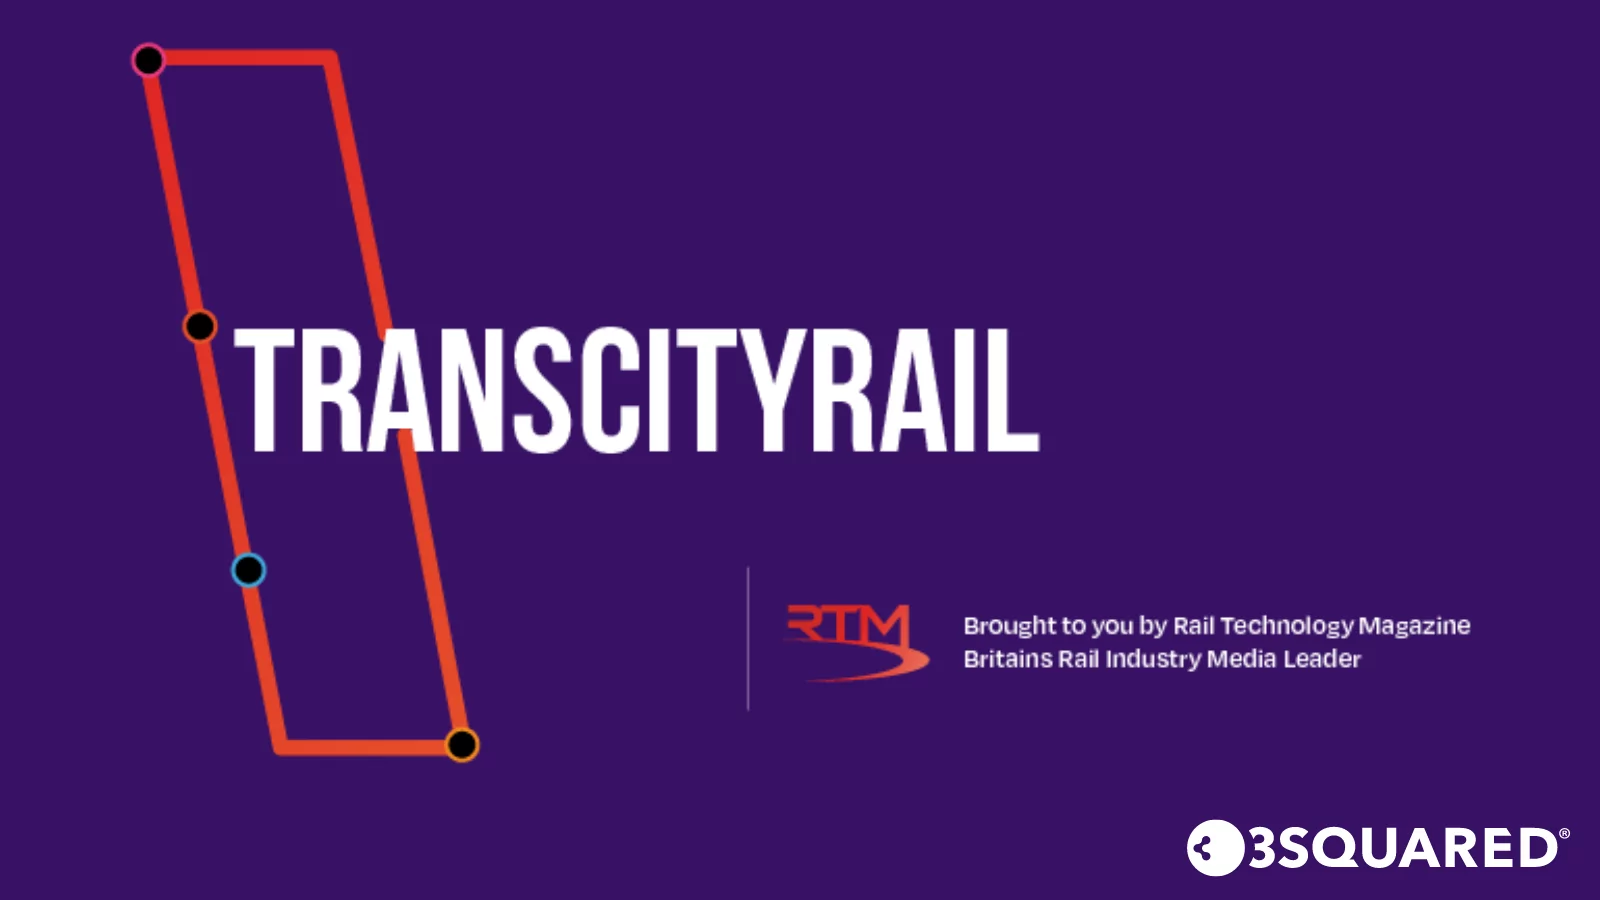 TransCityRail Midlands logo and 3Squared logo on a purple background.